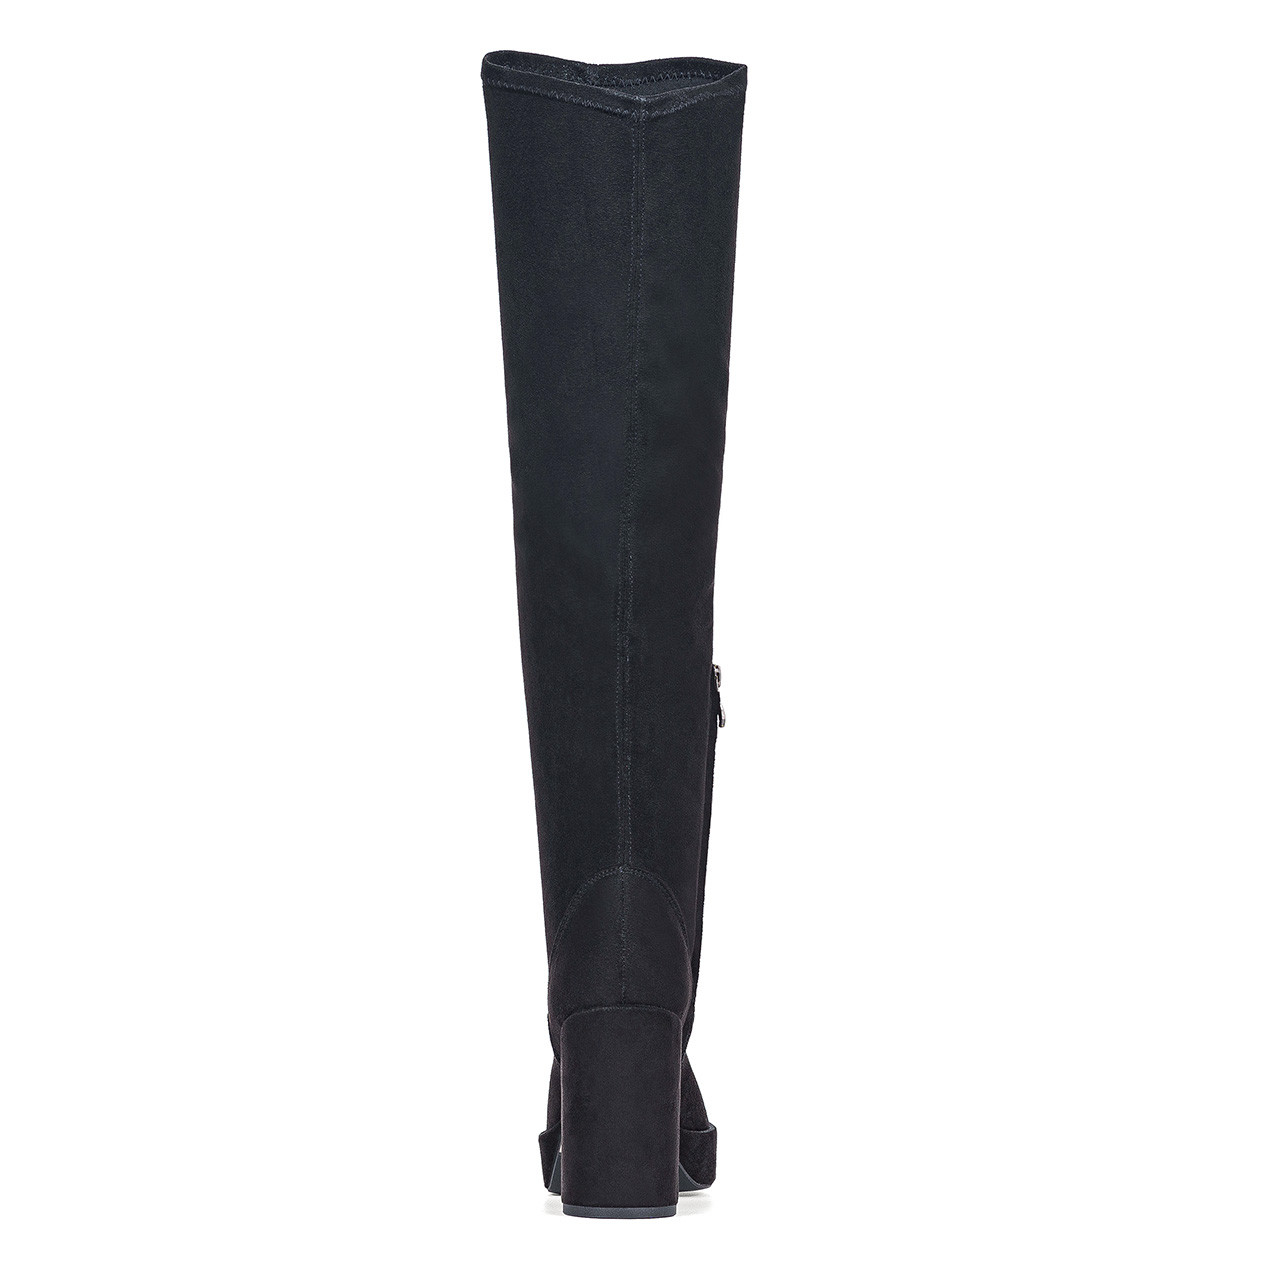 Black leather handcrafted thigh boots with a stable heel